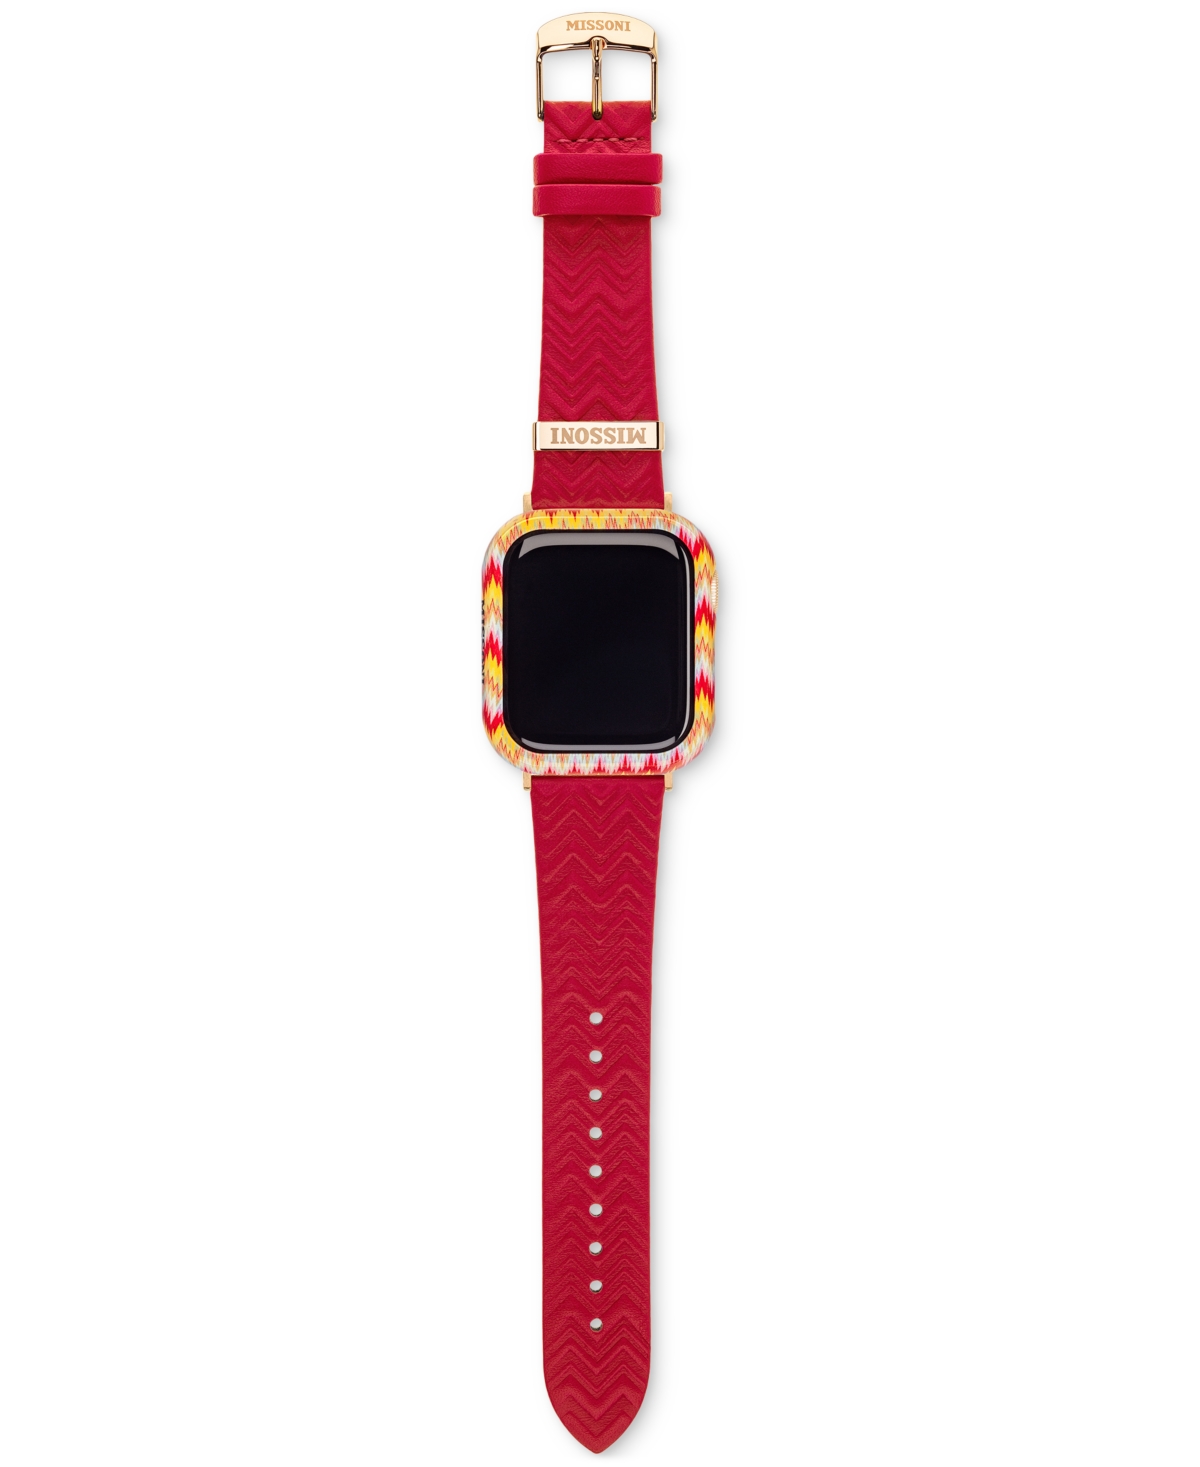 MISSONI RED CASE & LEATHER STRAP FOR APPLE WATCH 41MM GIFT SET